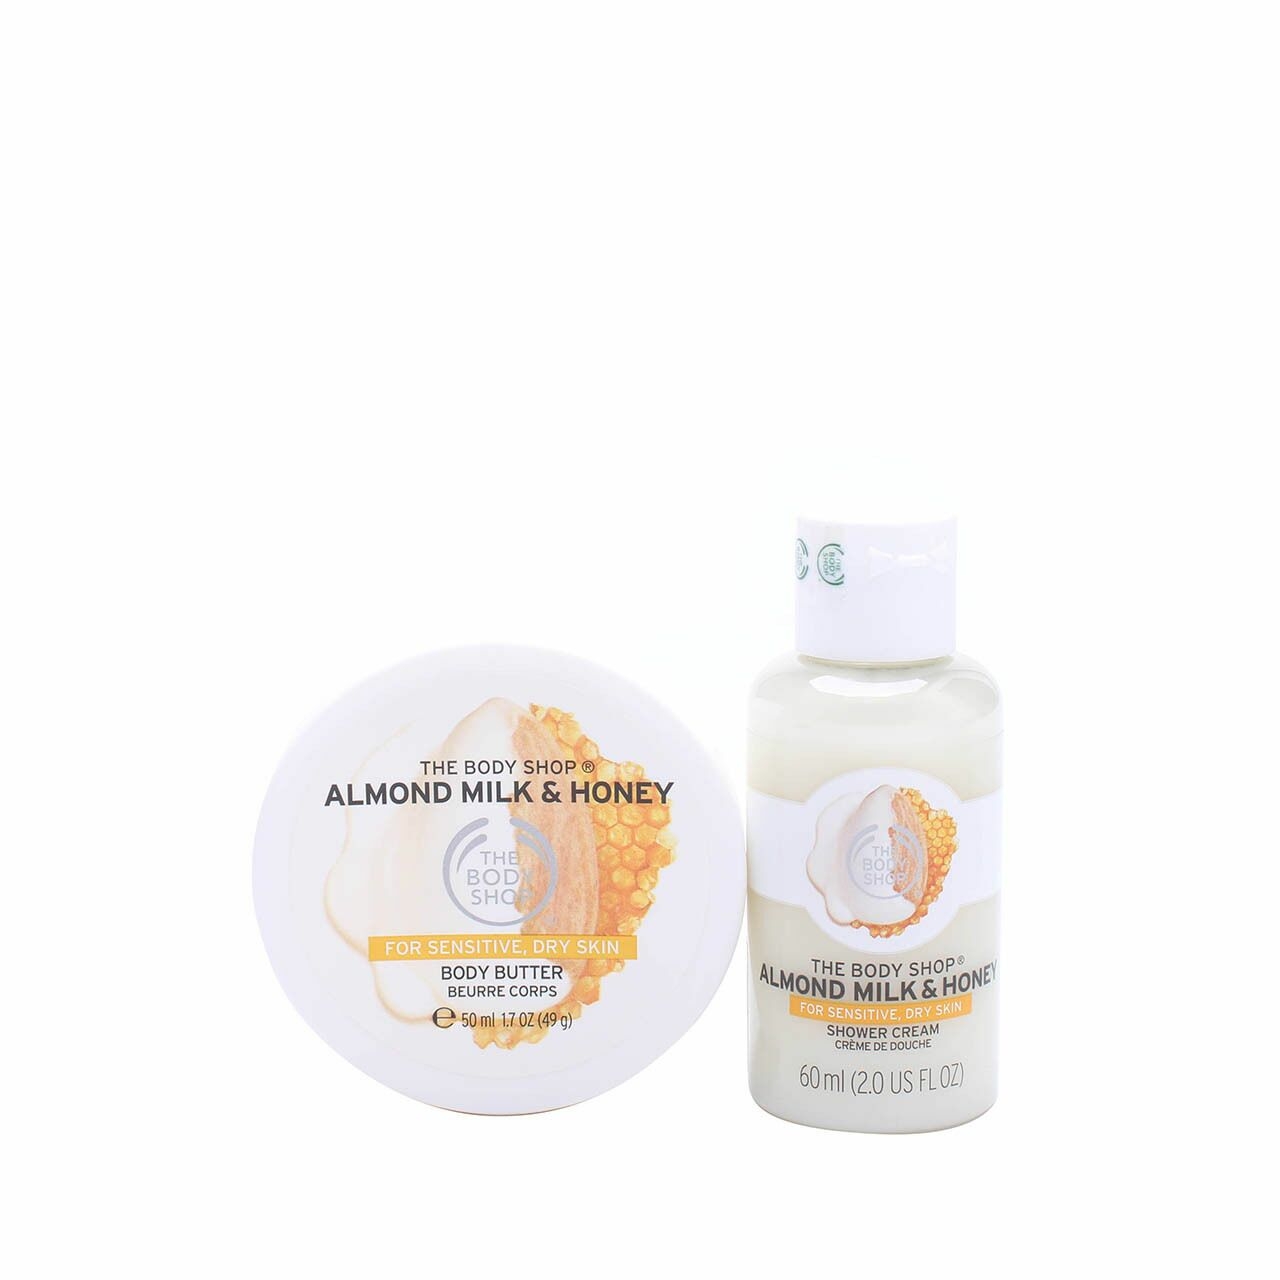 The Body Shop Shower Gel and Body Butter Almond Milk & Honey Sets and Palette